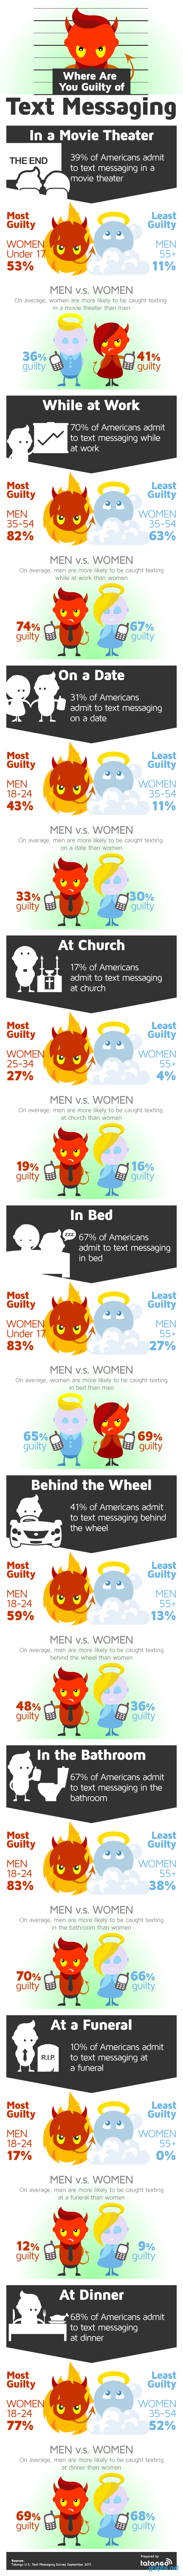 americans text messaging facts